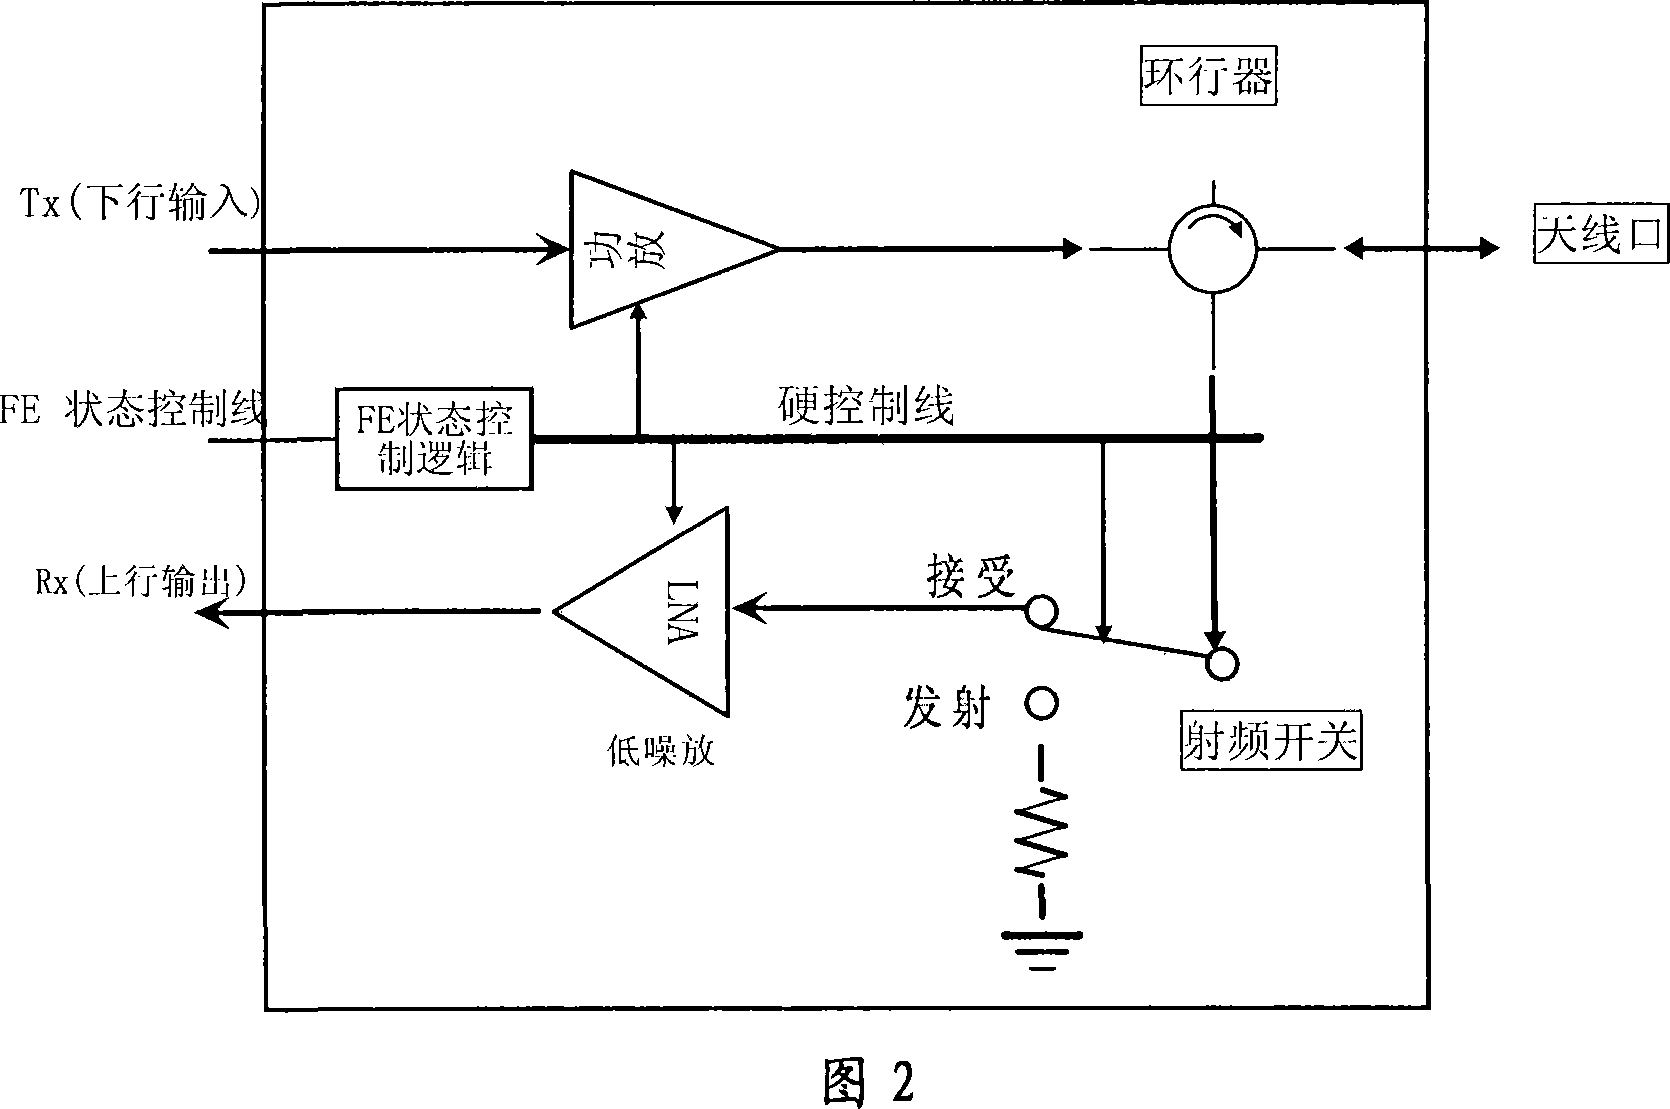 Test device and method for implementing the TD-SCDMA RF front-end full duplex